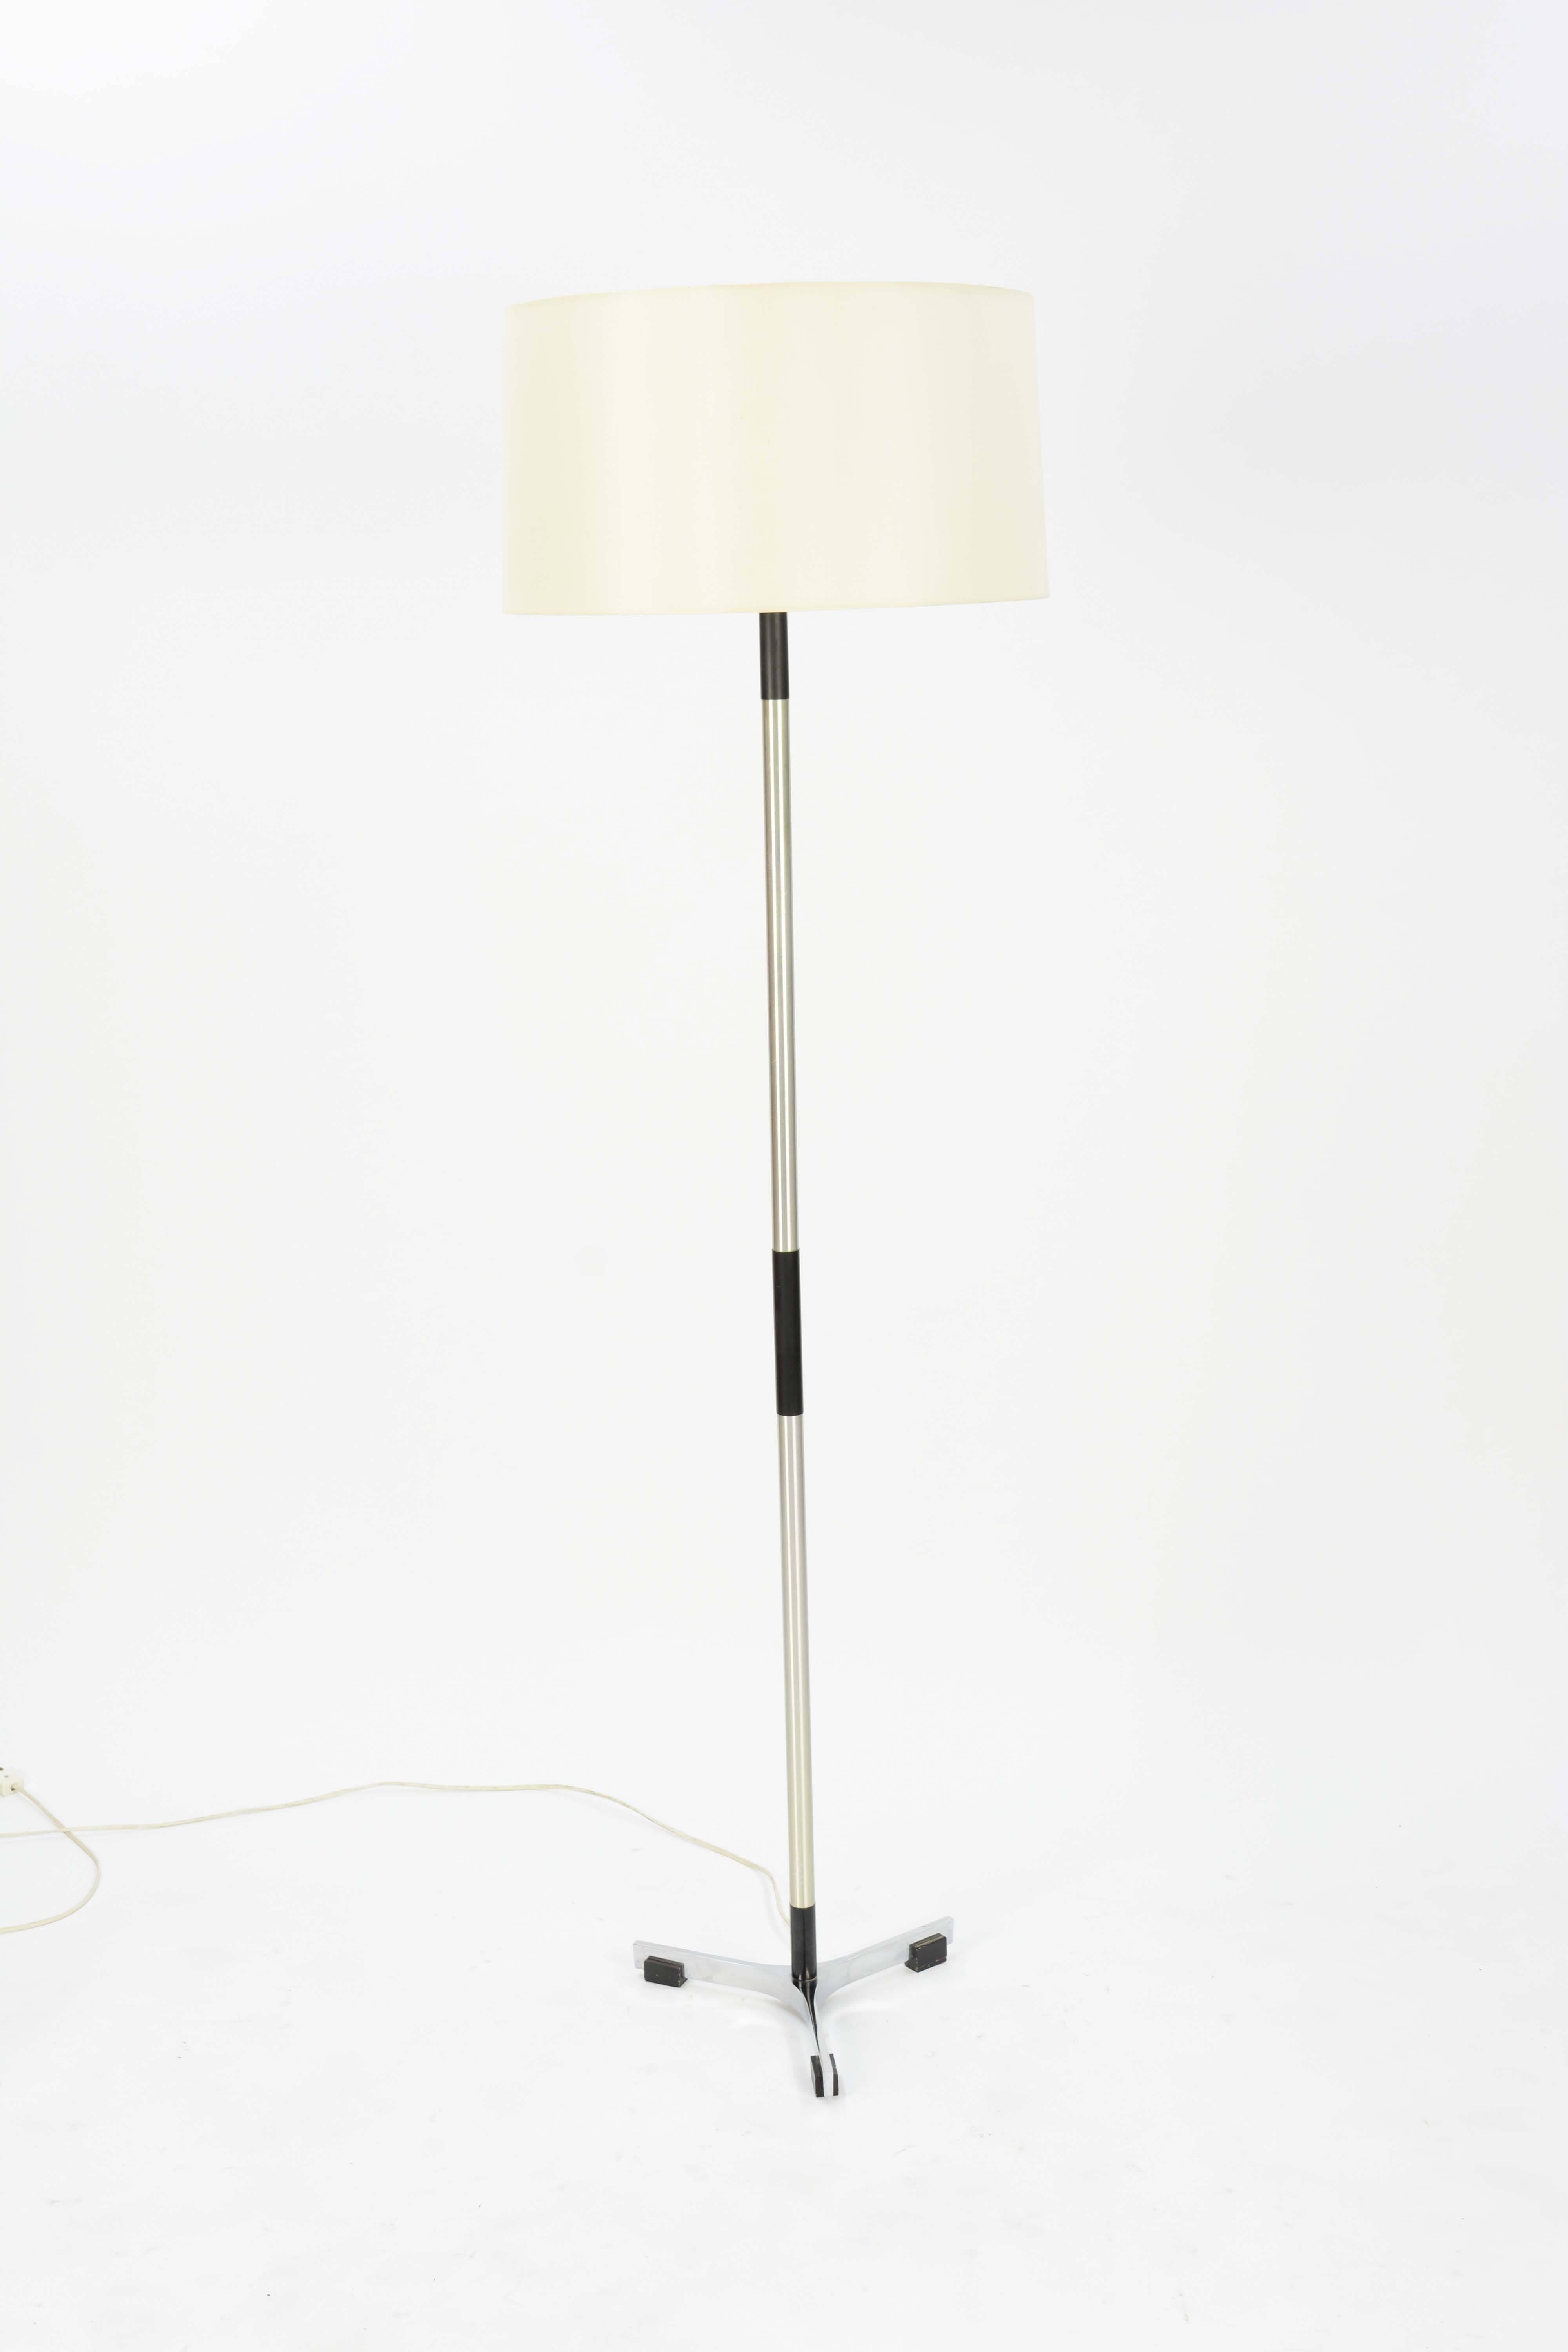 A stain aluminium and black accented tripod floor lamp called the Monolit, 1996 by Jo Hammerberg for Fog & Mørup of Denmark. Shade is not included.